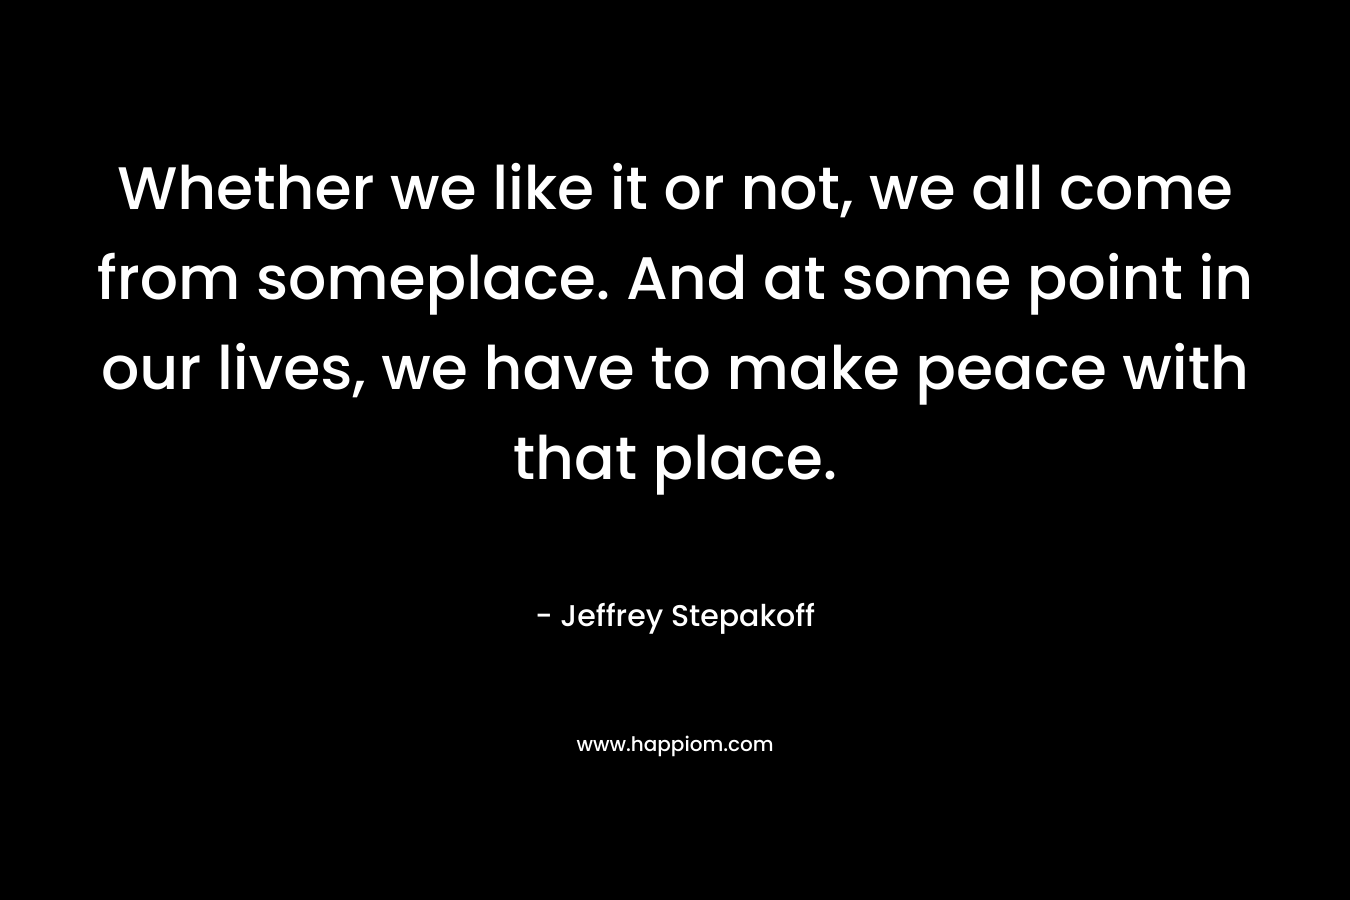 Whether we like it or not, we all come from someplace. And at some point in our lives, we have to make peace with that place. – Jeffrey Stepakoff